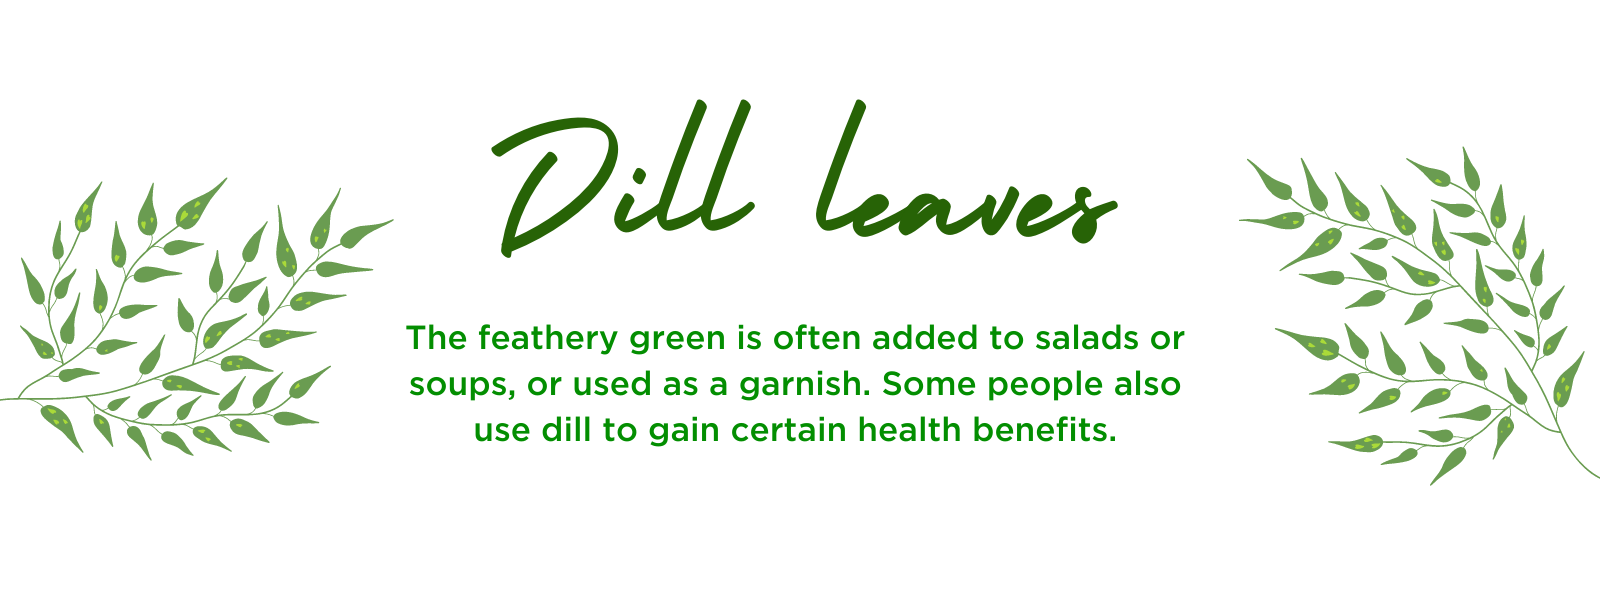 Dill leaves- Health Benefits, Uses and Important Facts